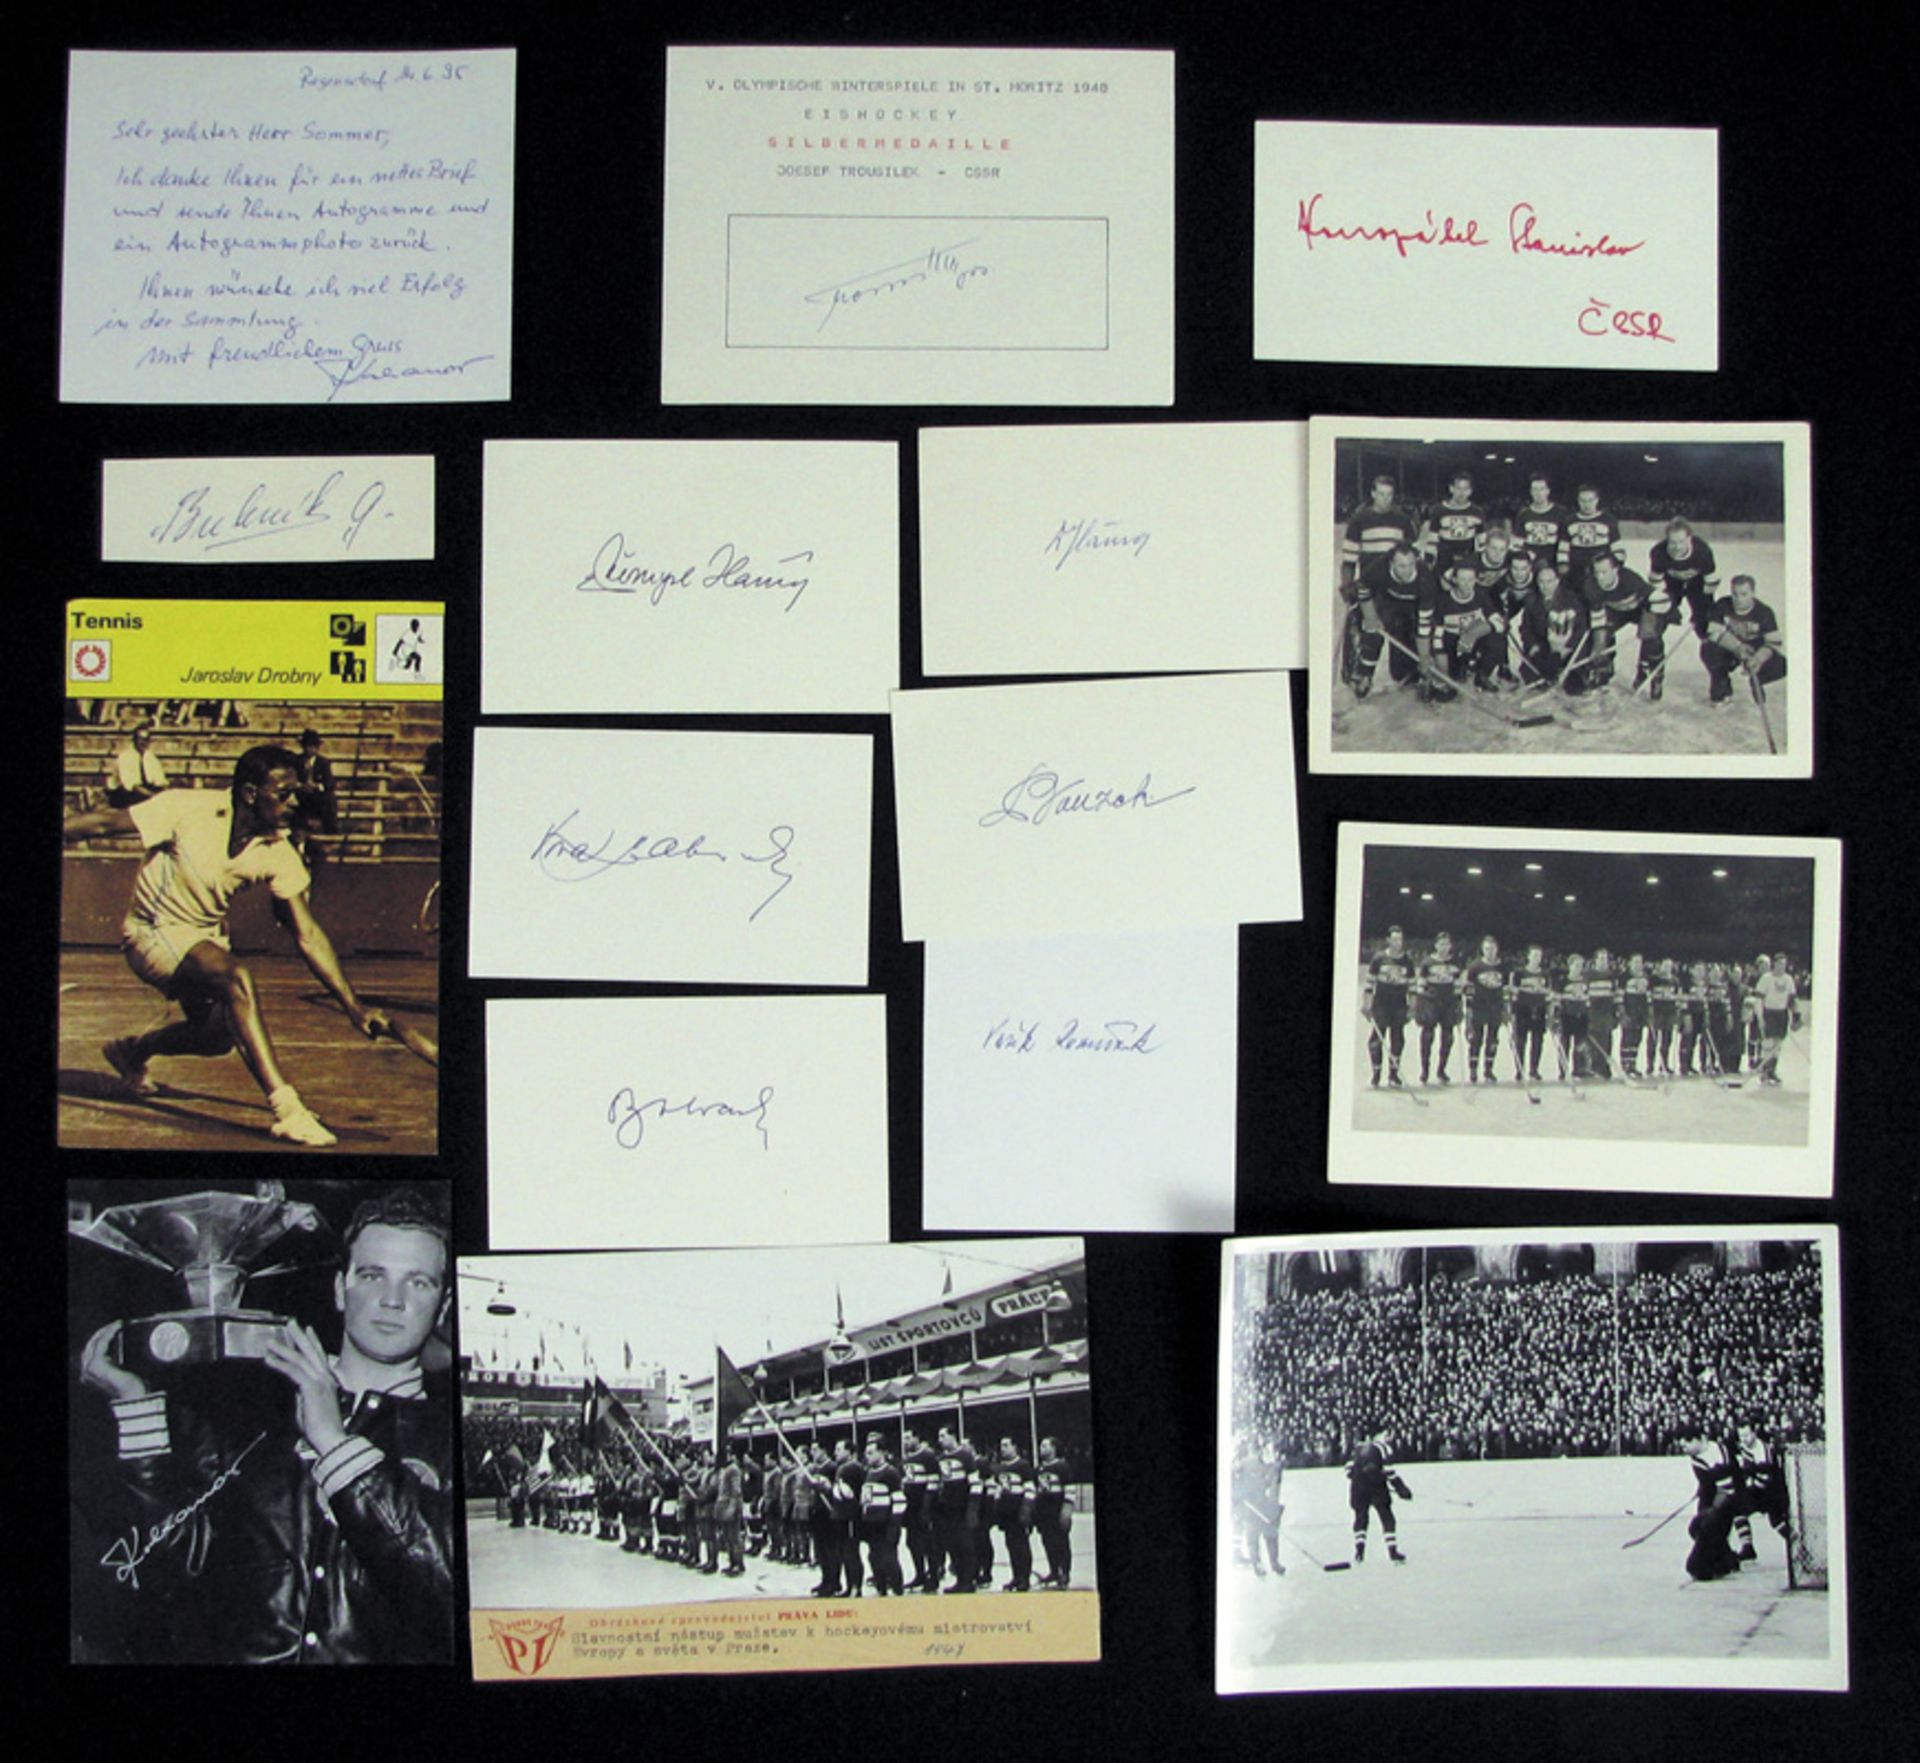 Olympic Games 1948 Autograph Icehockey CSSR - Ice Hockey Olympic Winter Games 1948 silver medallist 